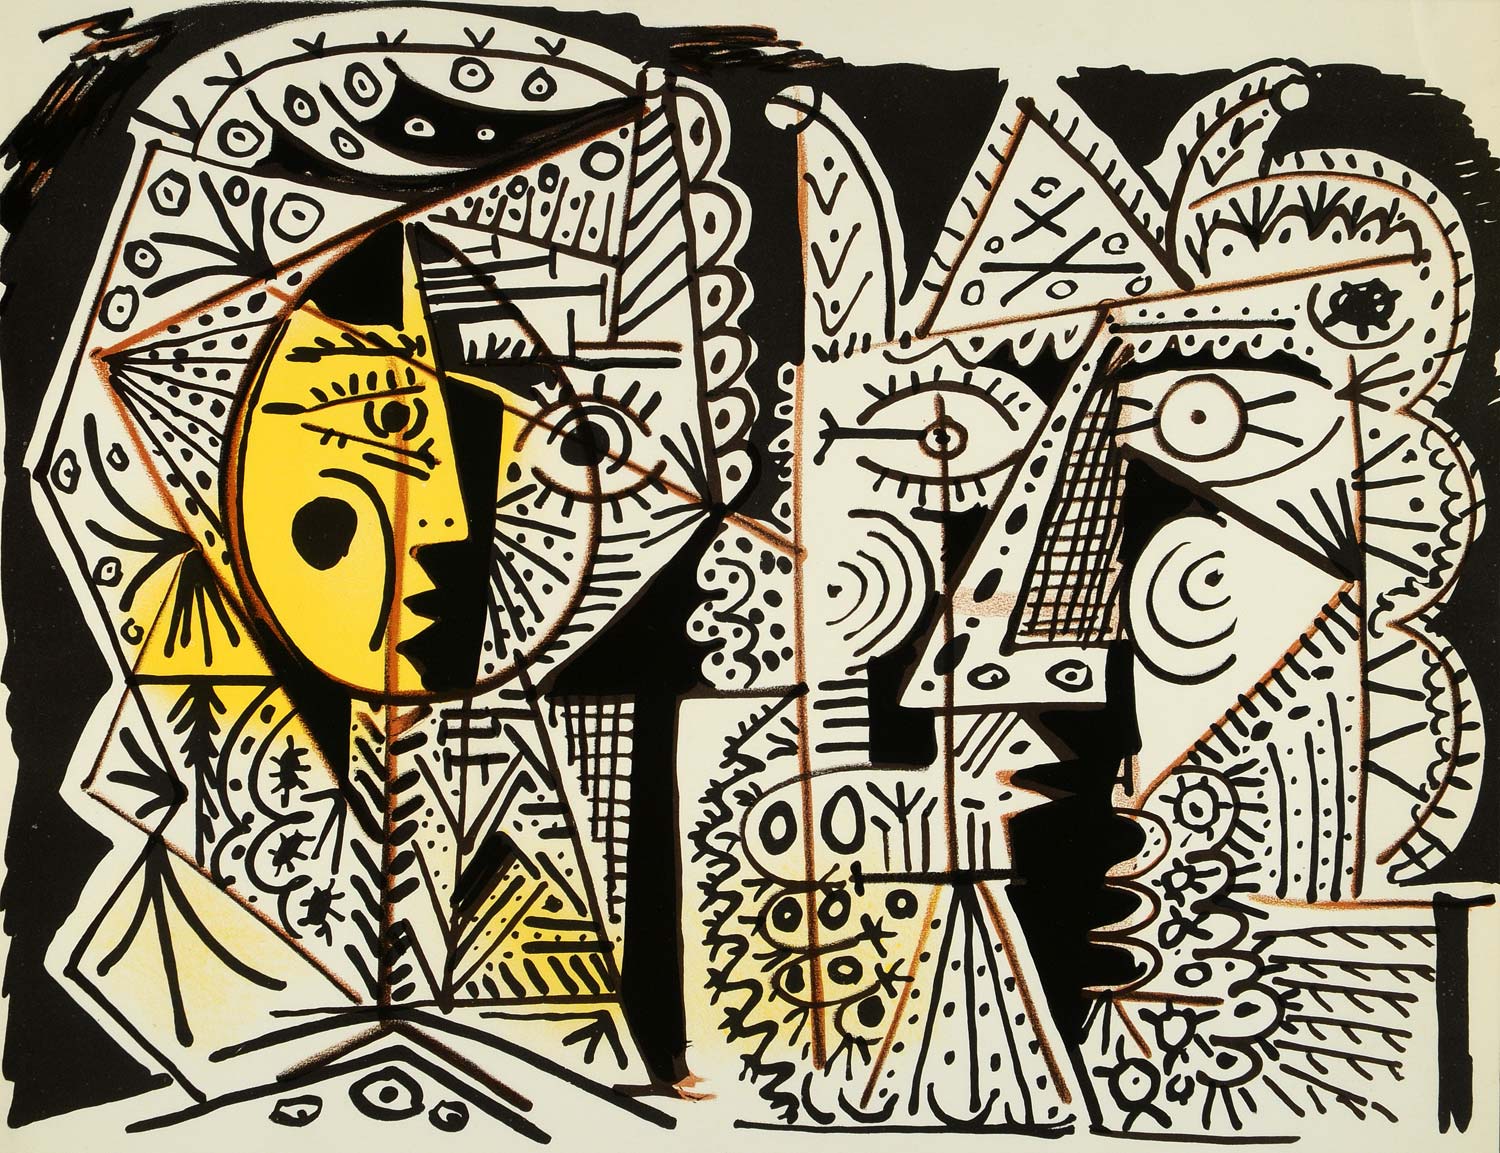 1966 Lithograph Picasso Triangular Abstract Eyes Secrets d'alcove d'un atelier